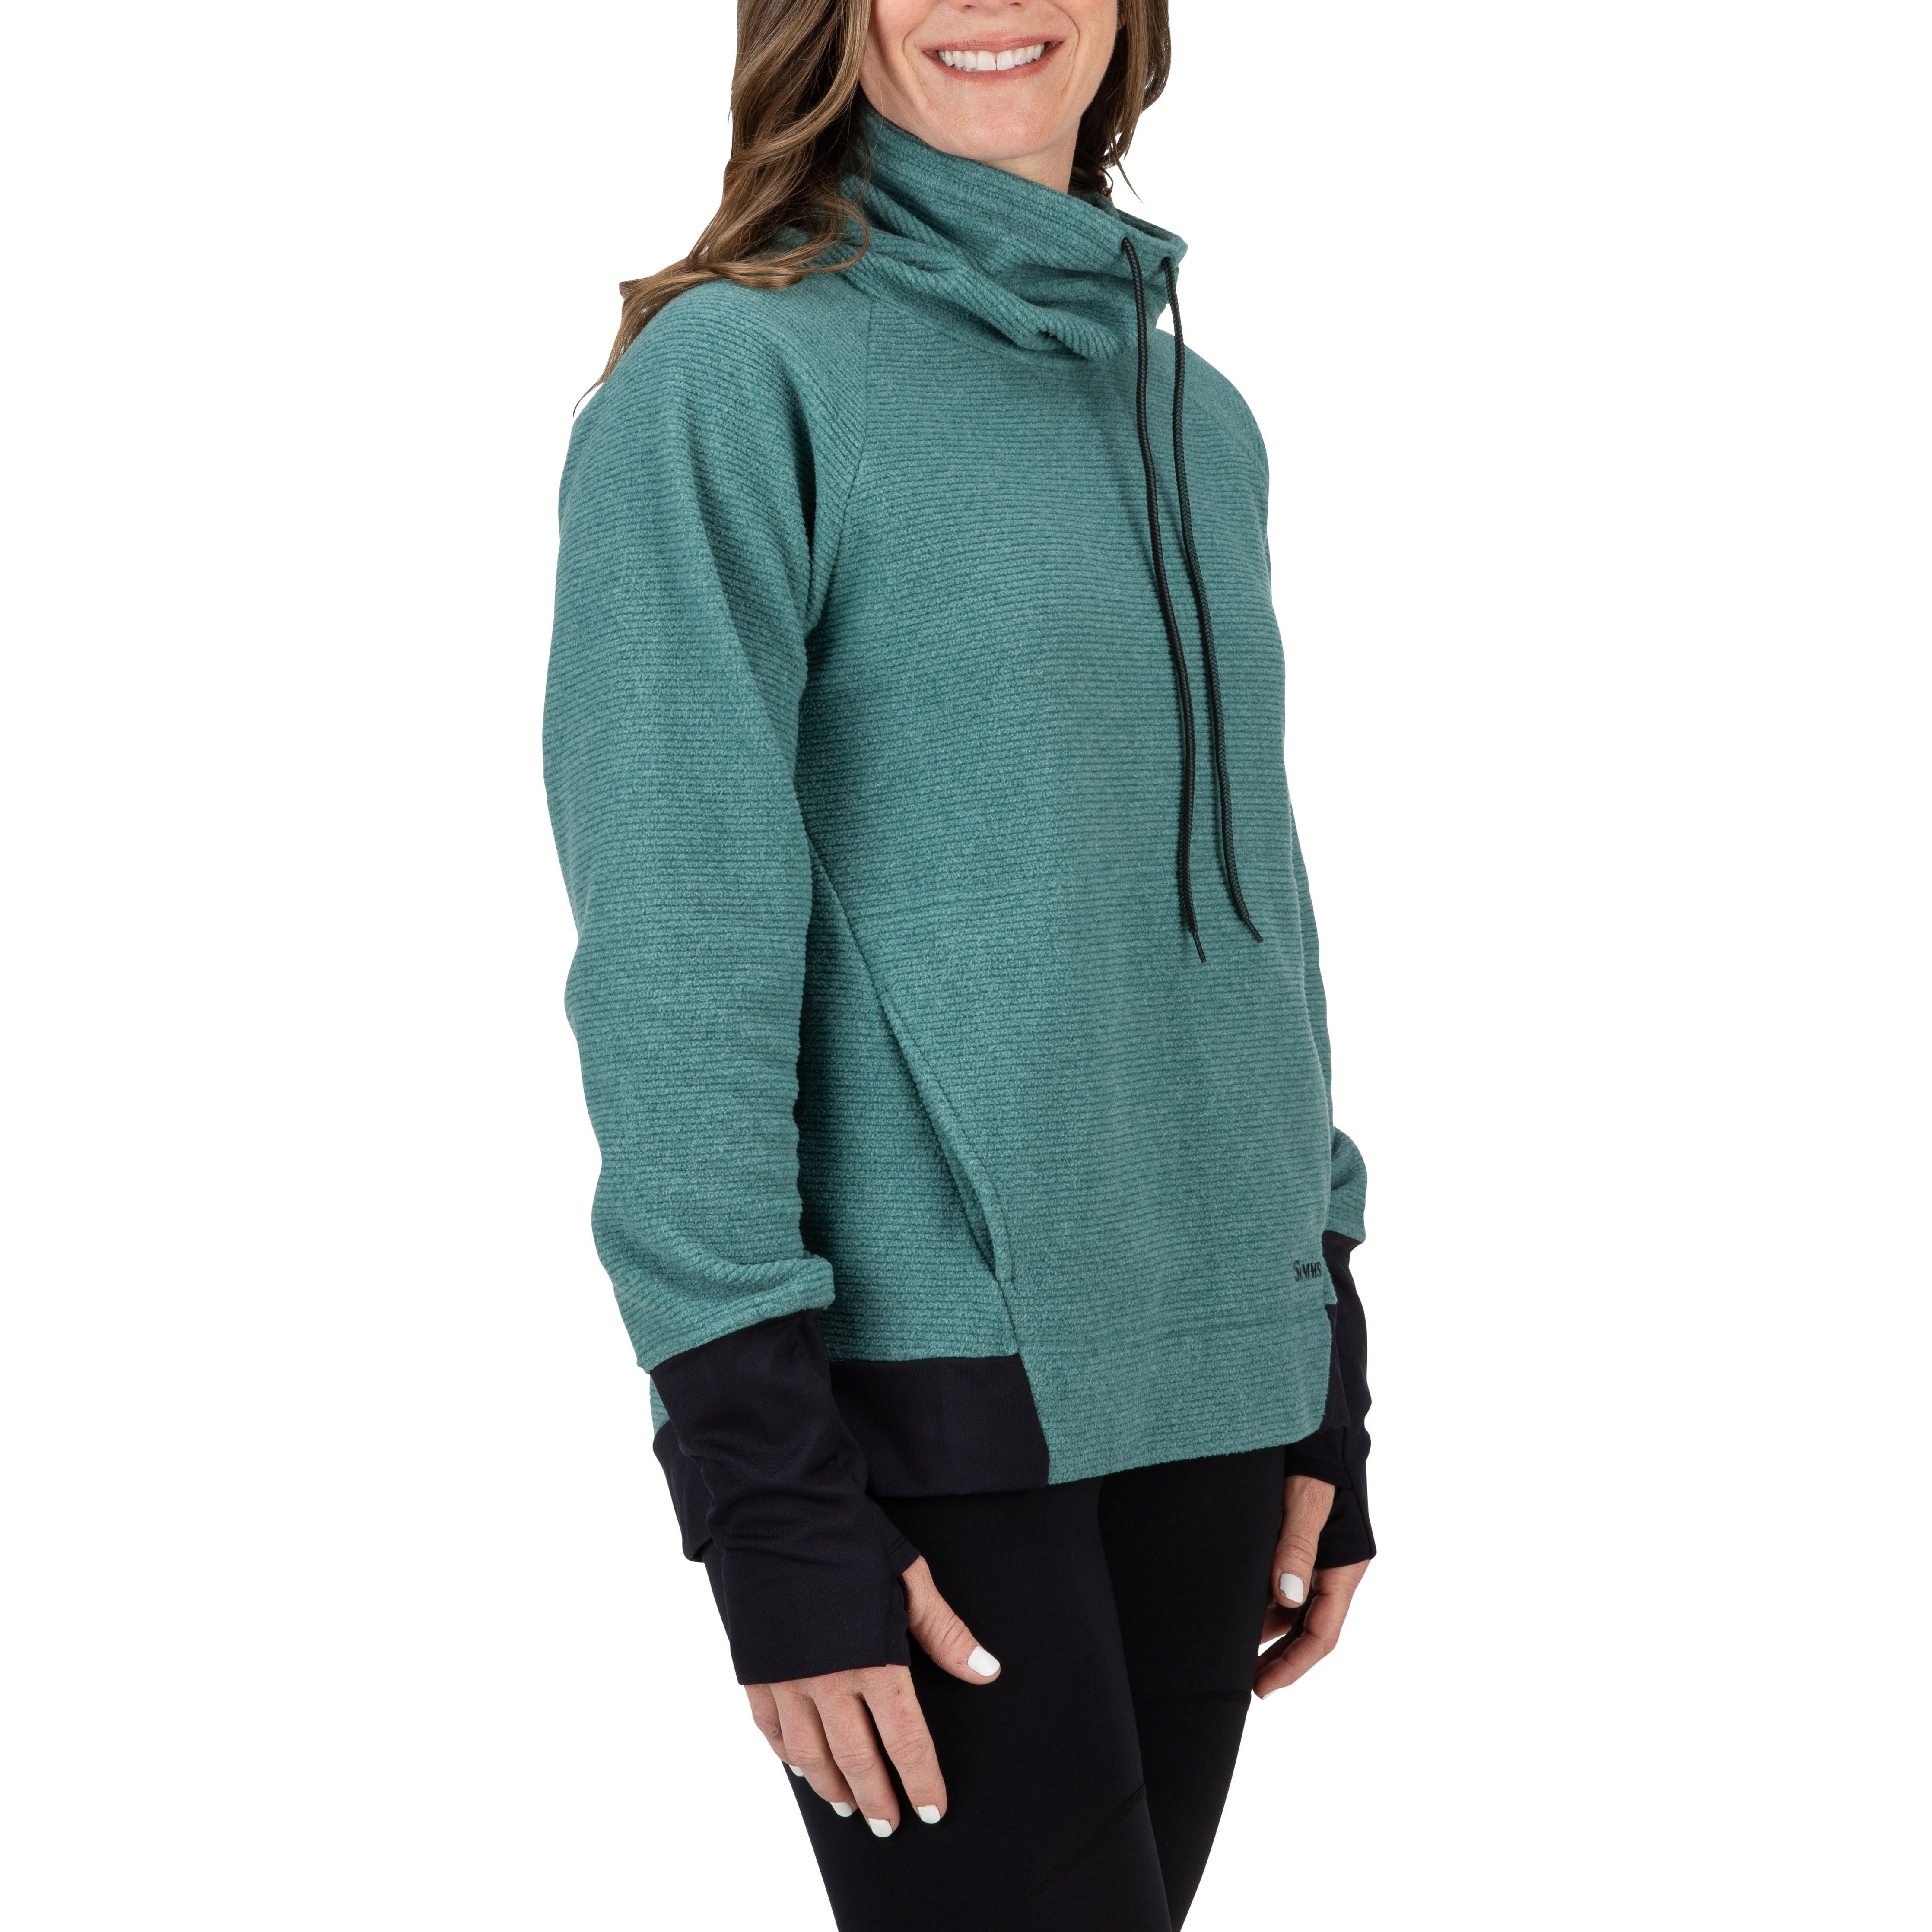 Simms Women's Rivershed Sweater Avalon Teal Image 08